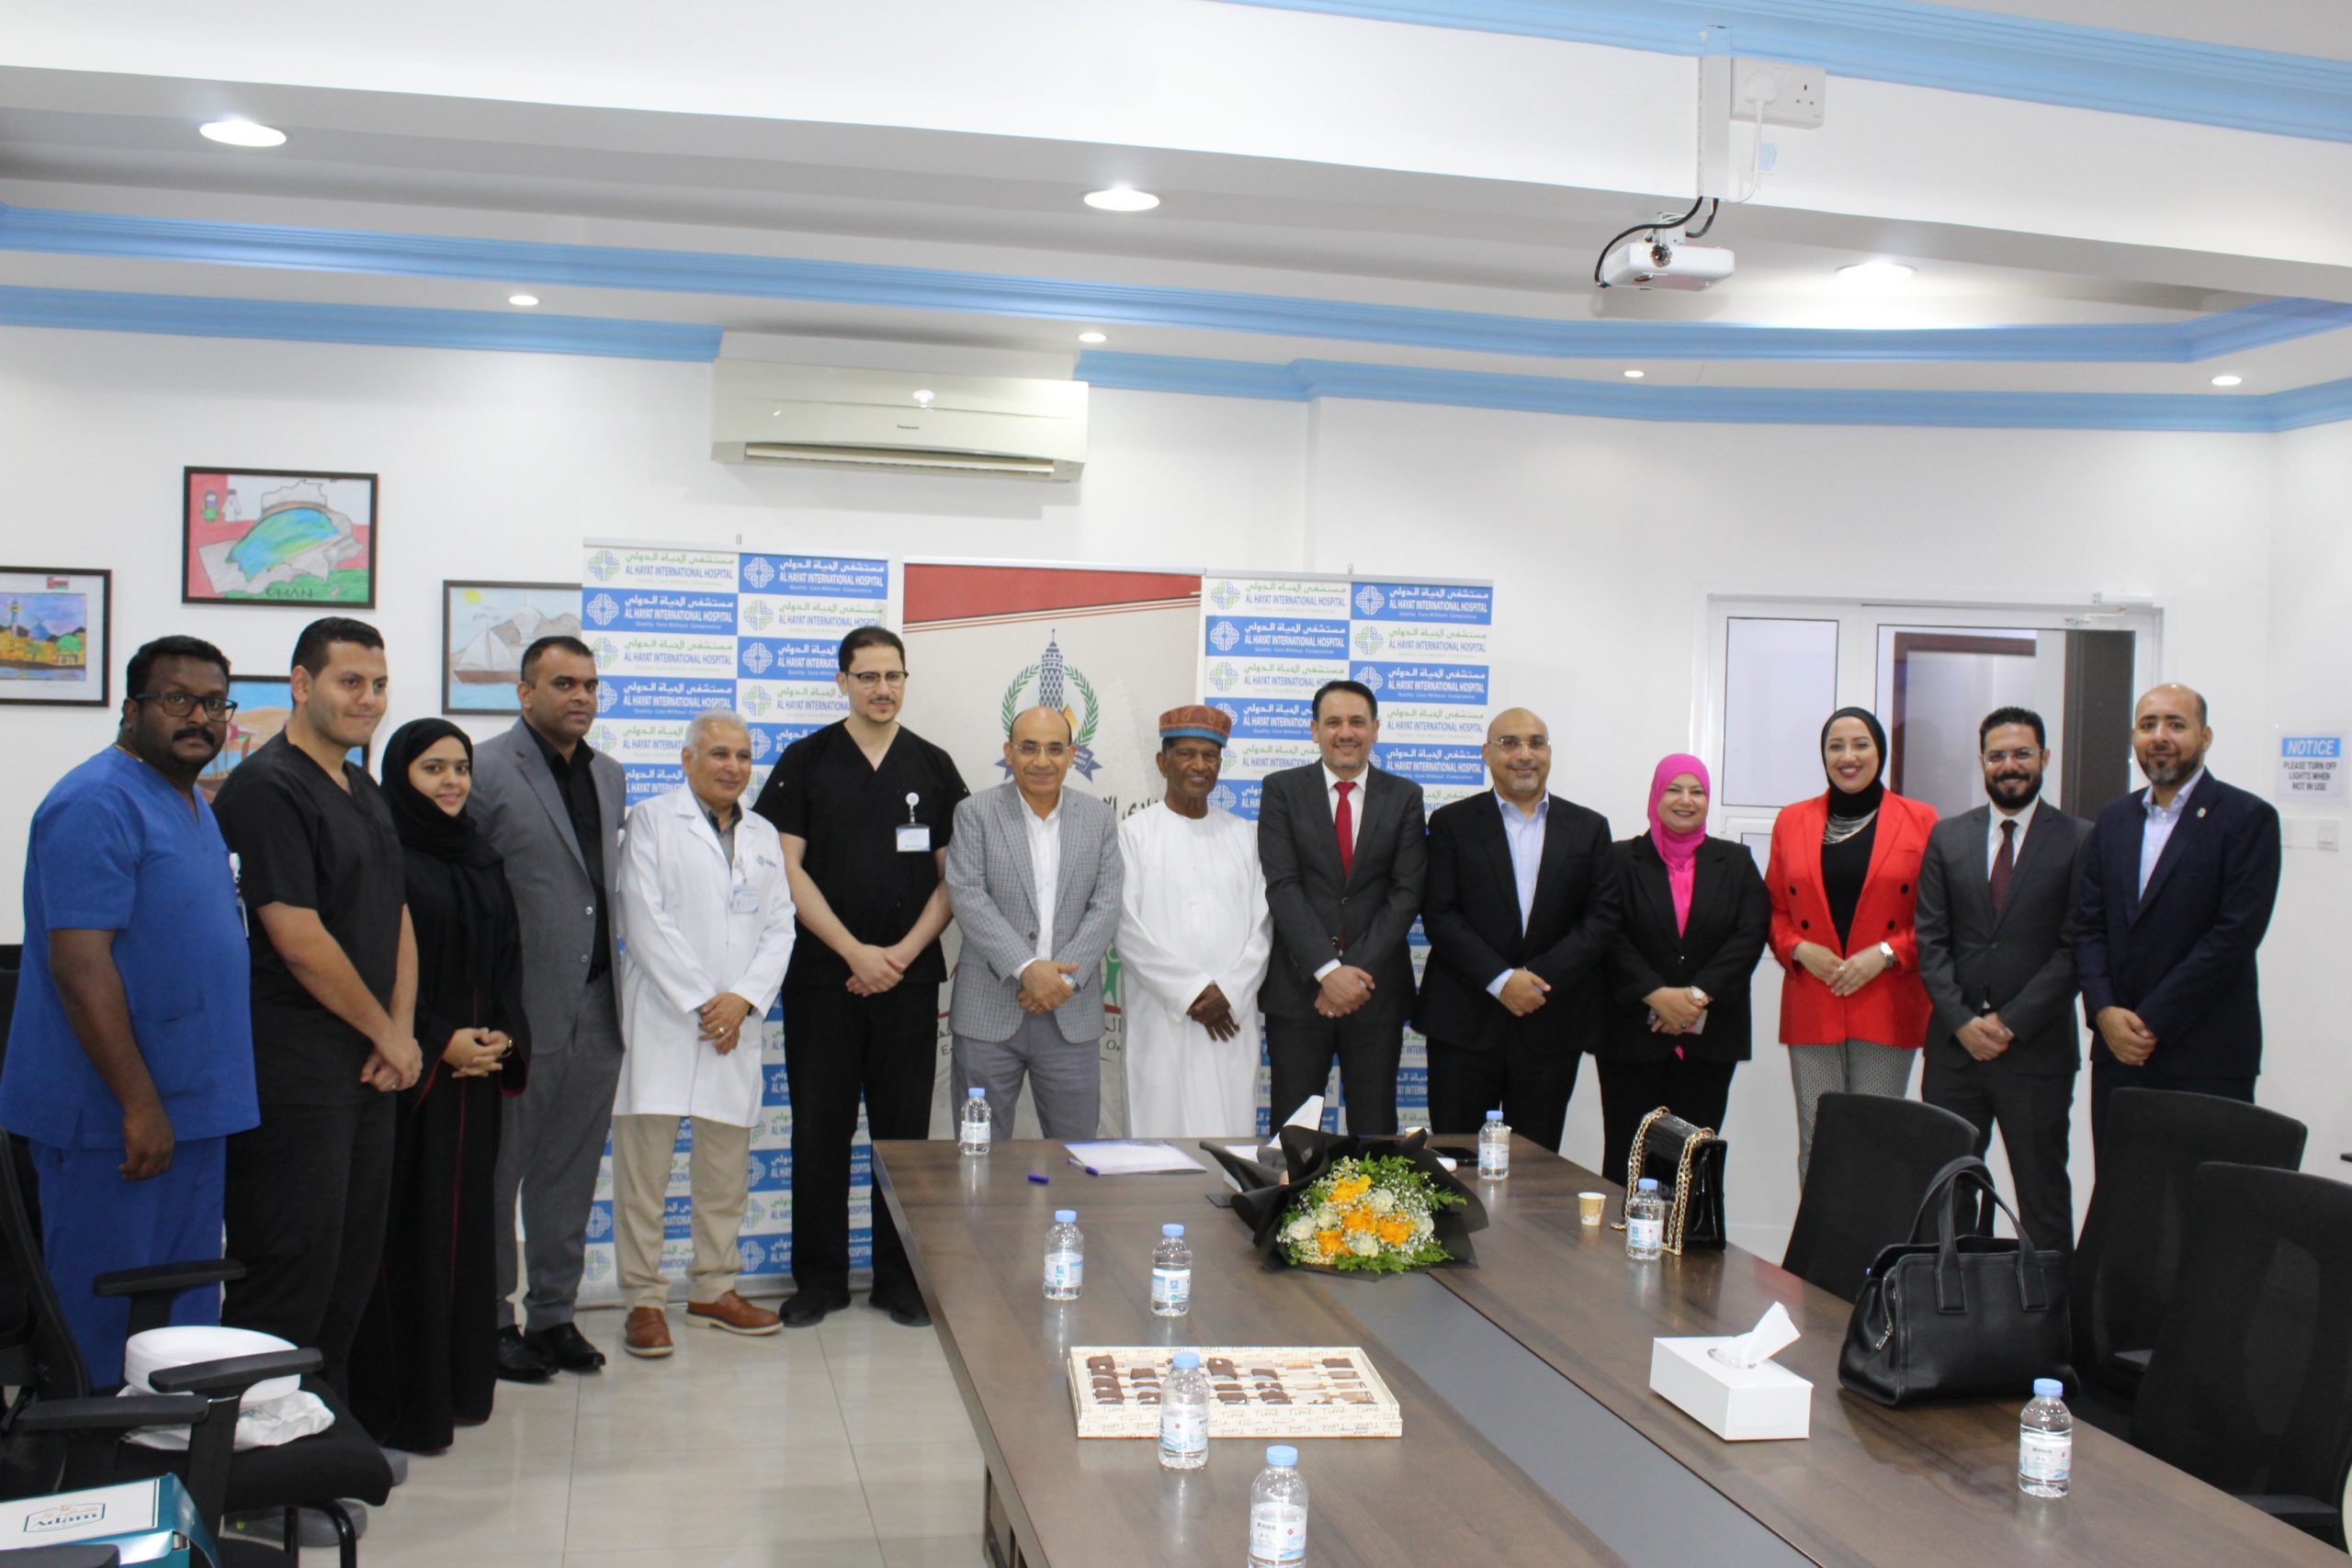 Al Hayat International Hospital in Oman has signed a MOU with the Egyptian Social Club.